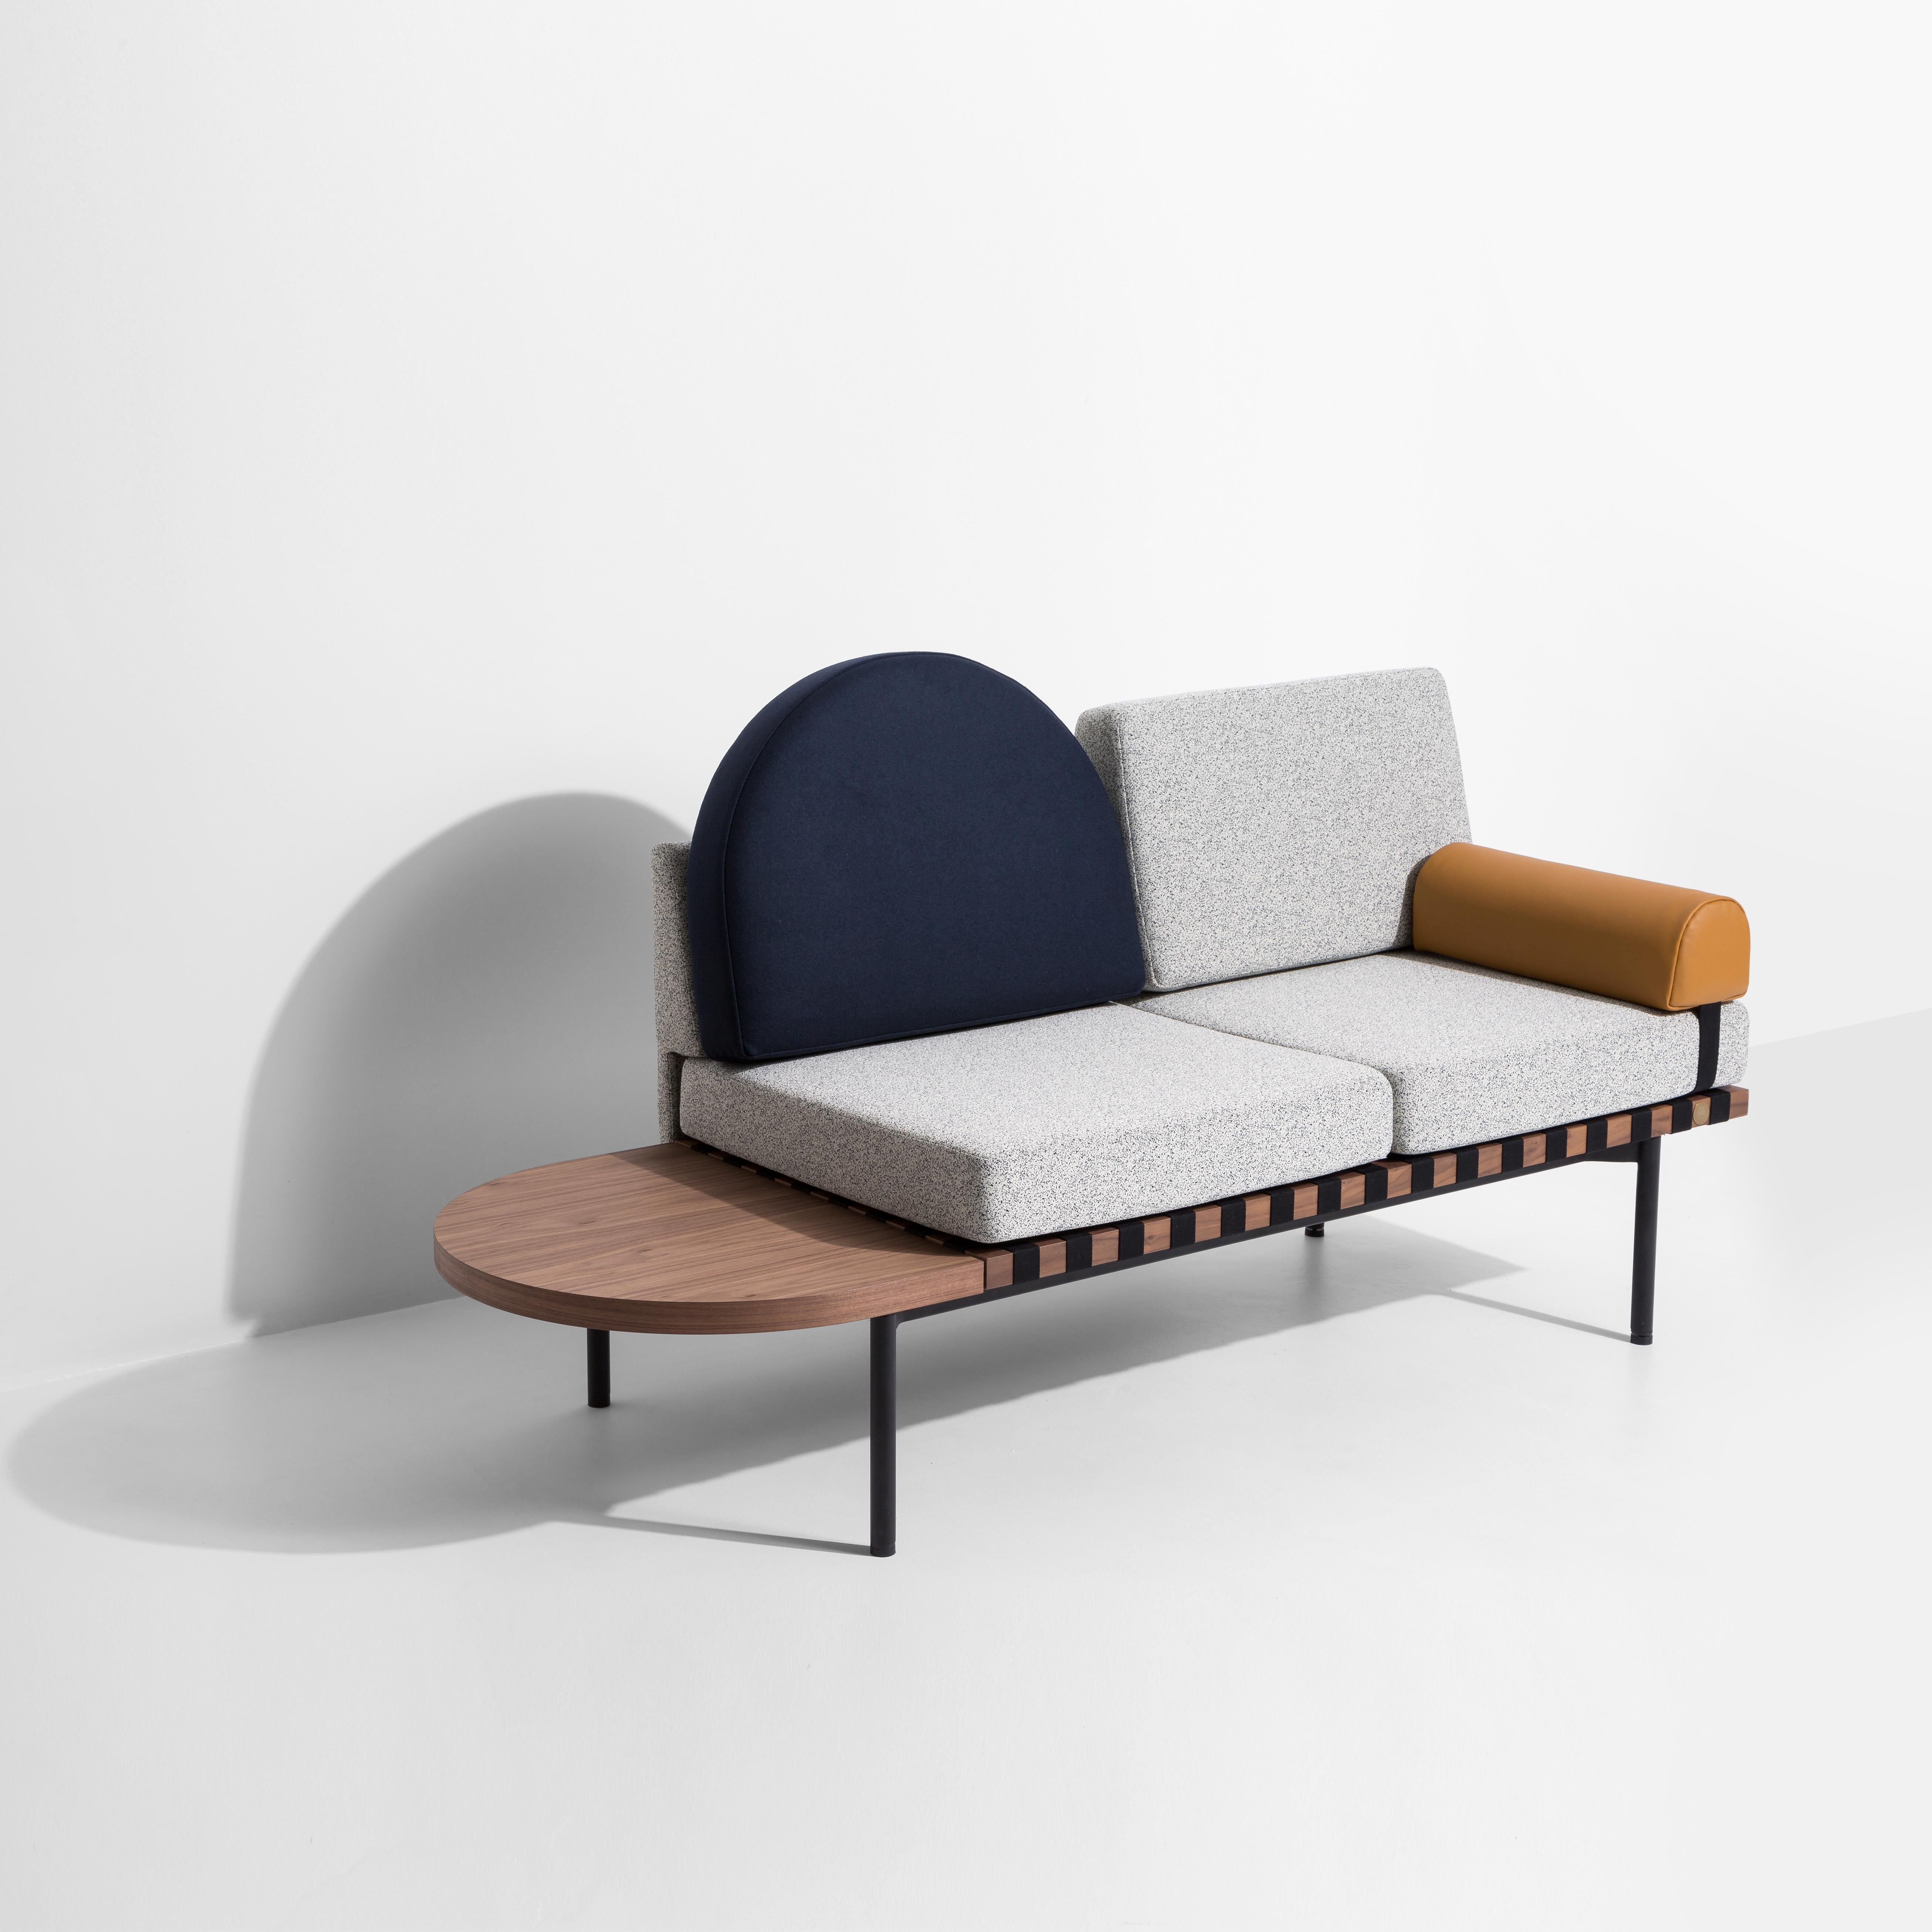 Petite Friture Grid Daybed in Blue-White Upholstery by Studio Pool, 2015

Pool designed the Grid collection in reference to the Bauhaus style and in honour of the graphic talents. Each element of this all-modular system retains the identity of the